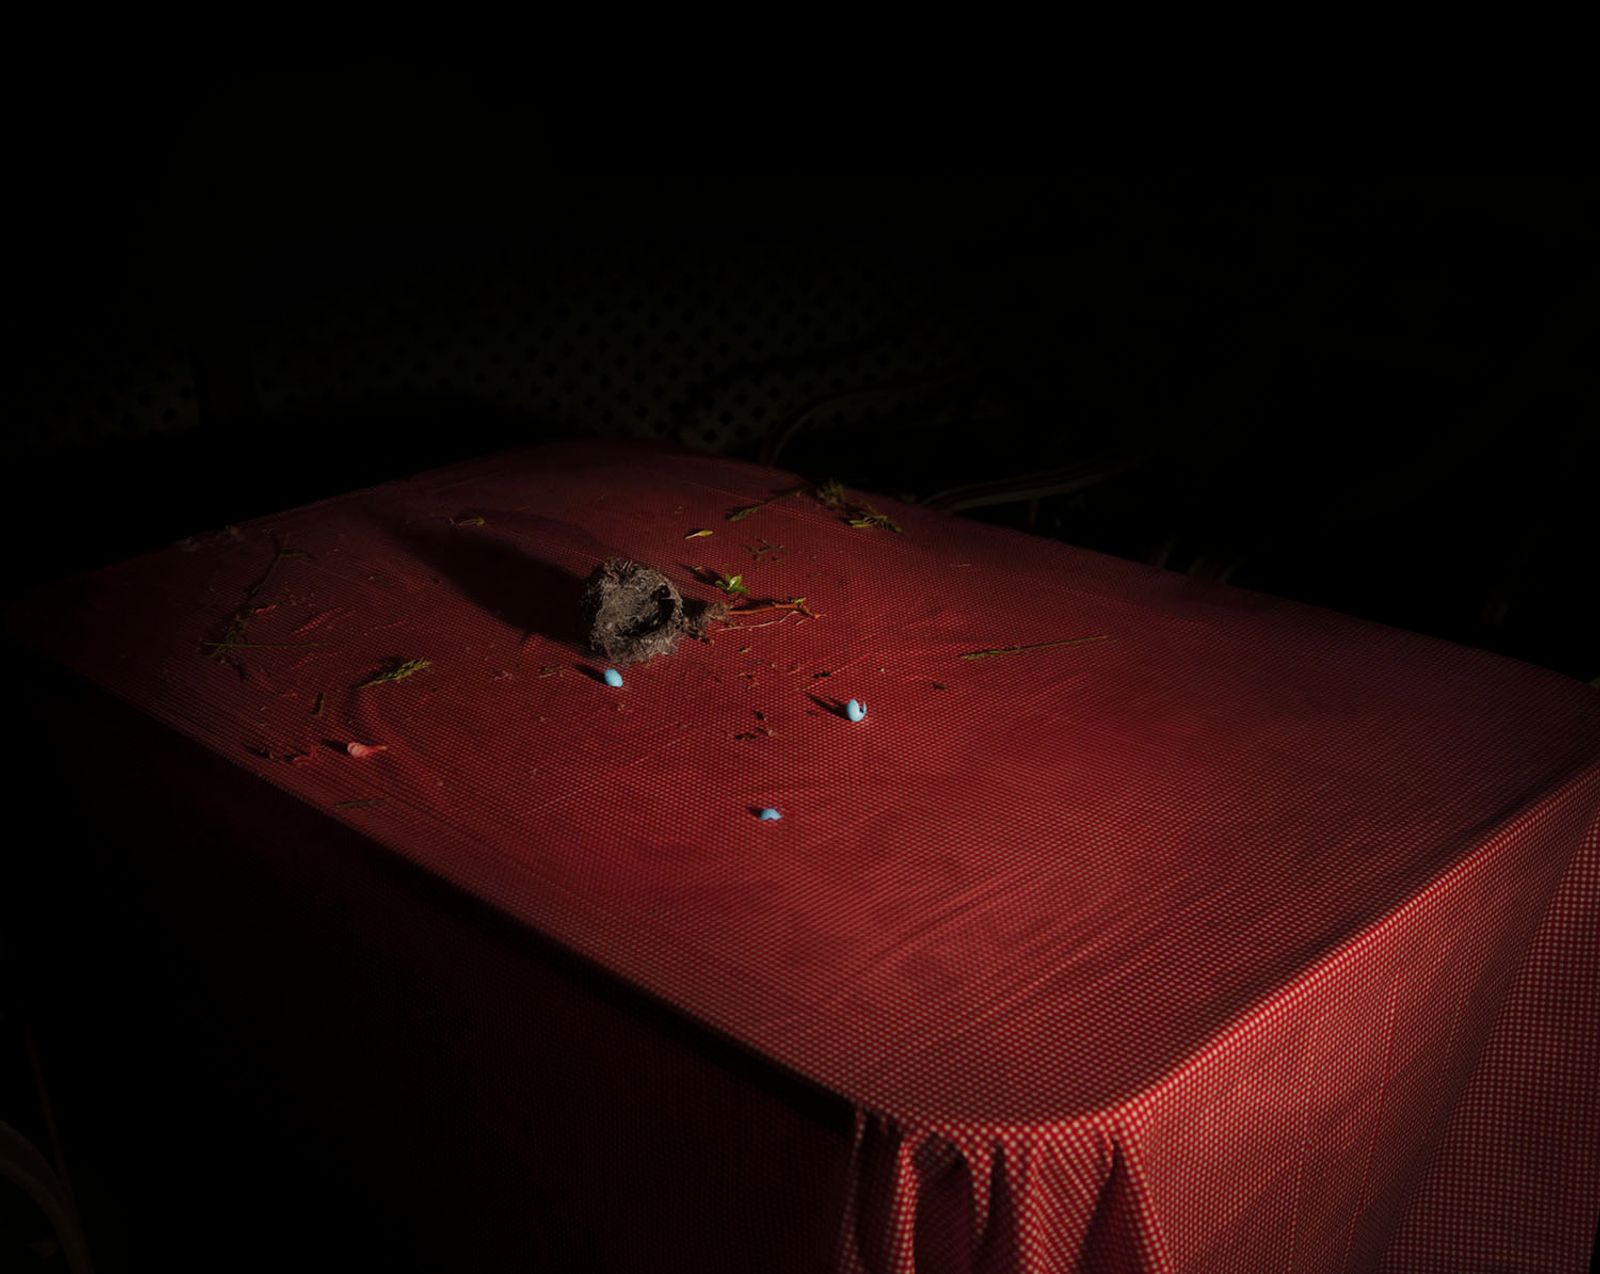 © Michelle Peters - Image from the Prick, Saccharine, Shatter photography project